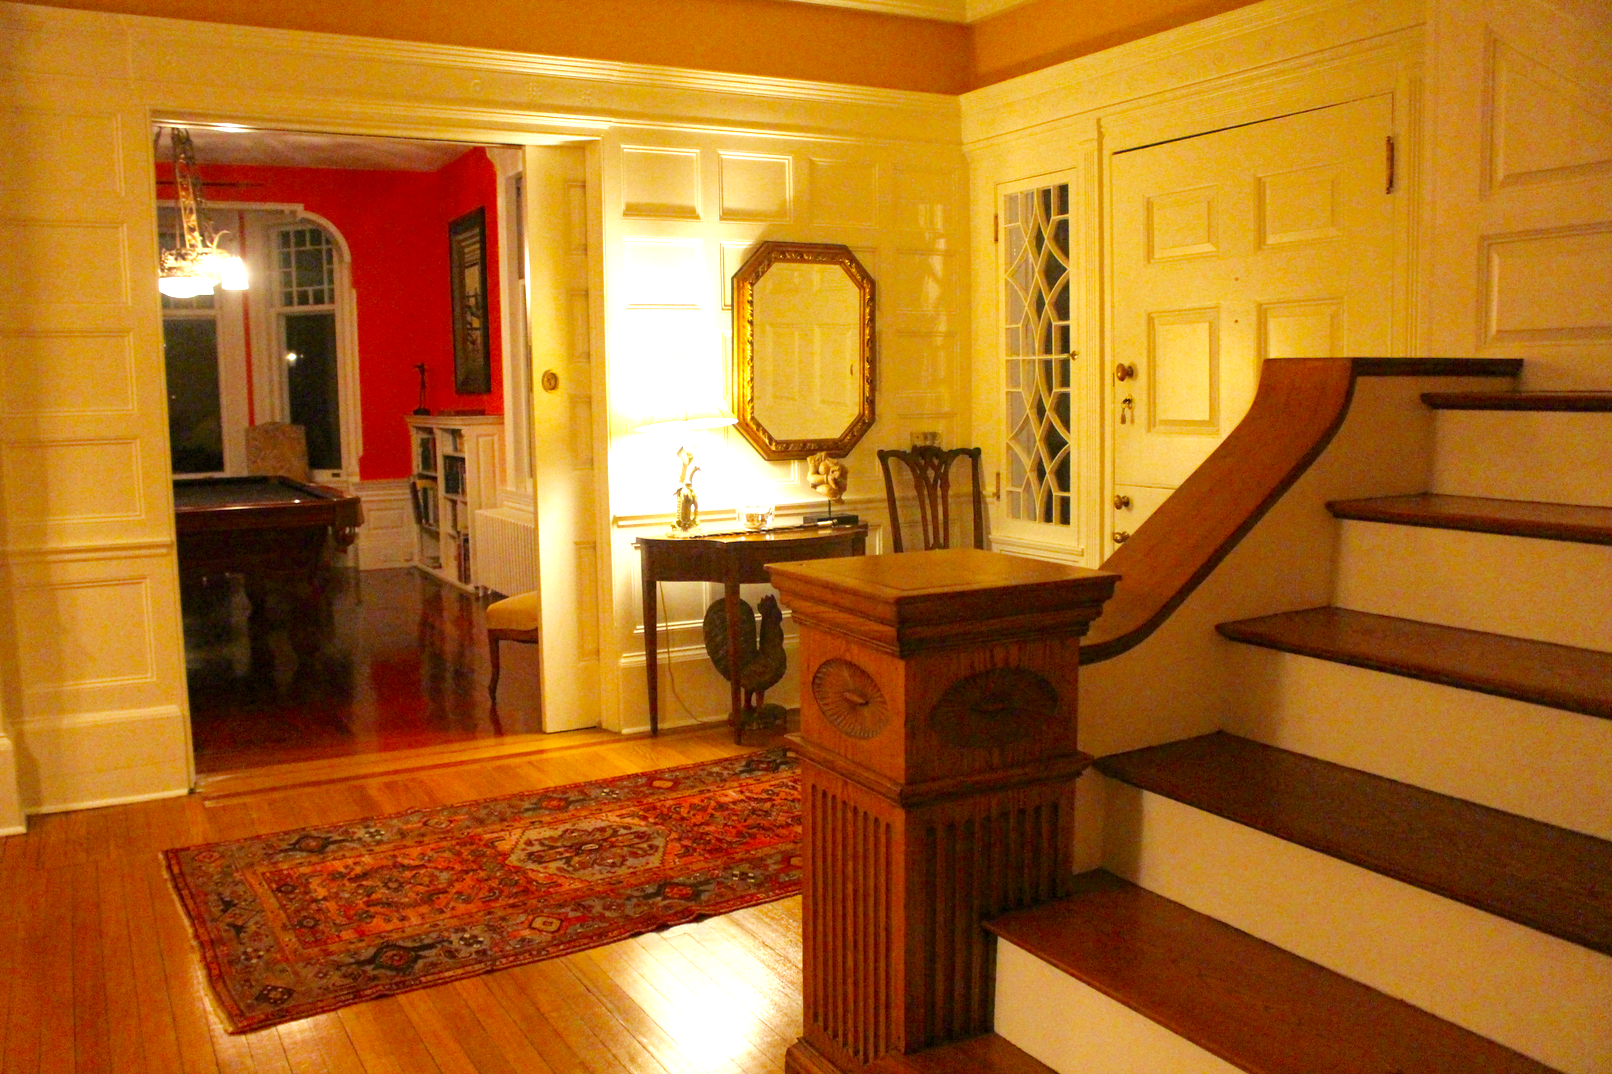 Entrance Hall at 107 Maple Ave, The John Sparks House. Photo: Leslie Yager